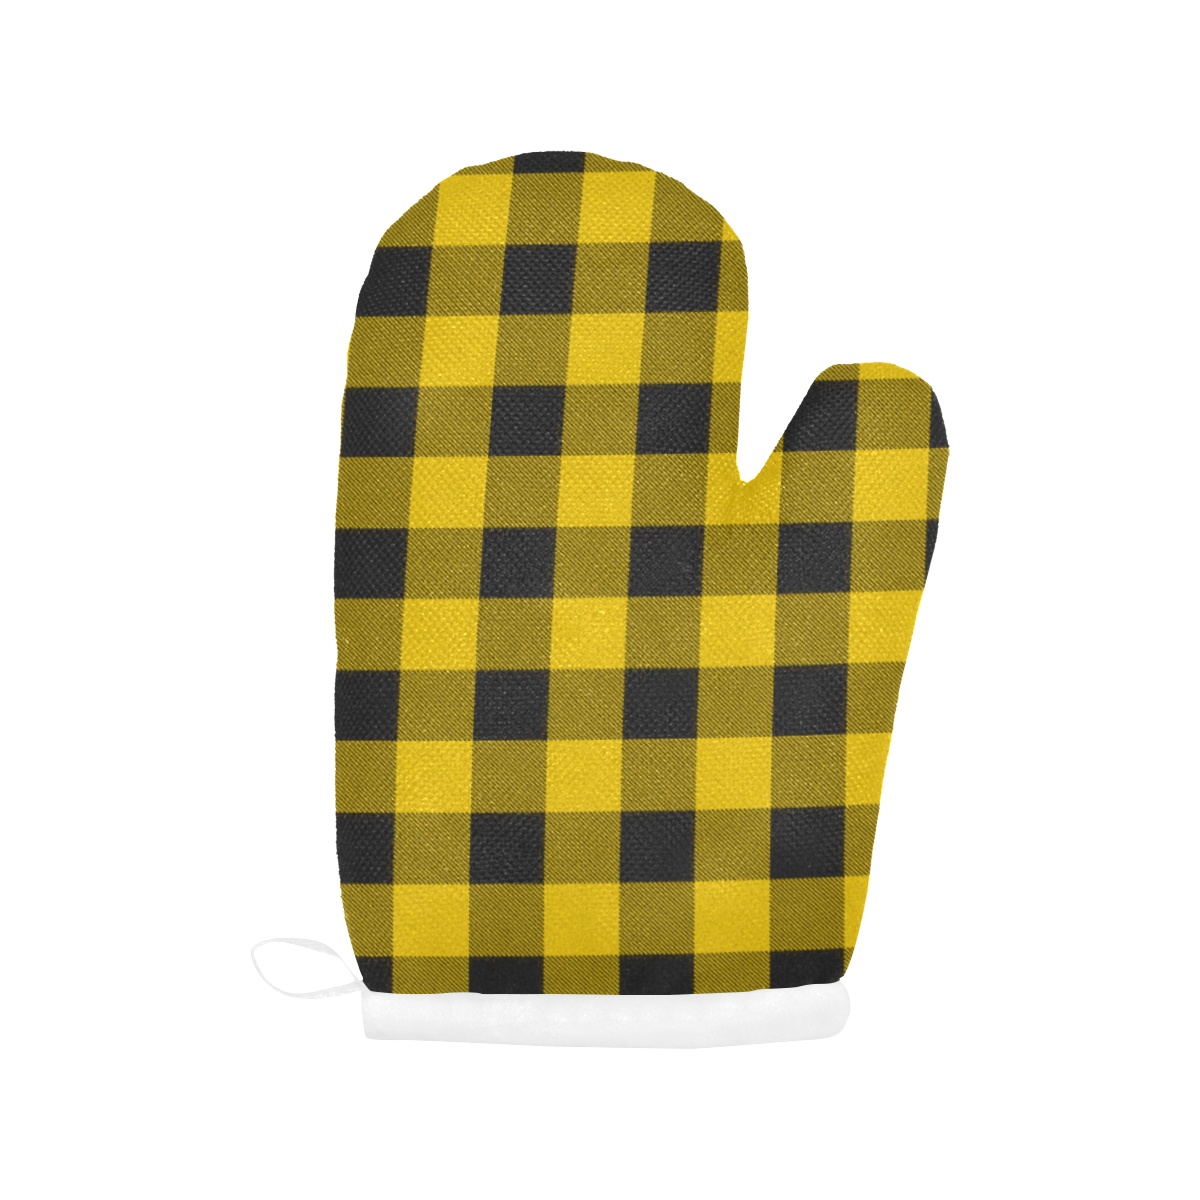 yellow  black plaid Oven Mitt (Two Pieces)